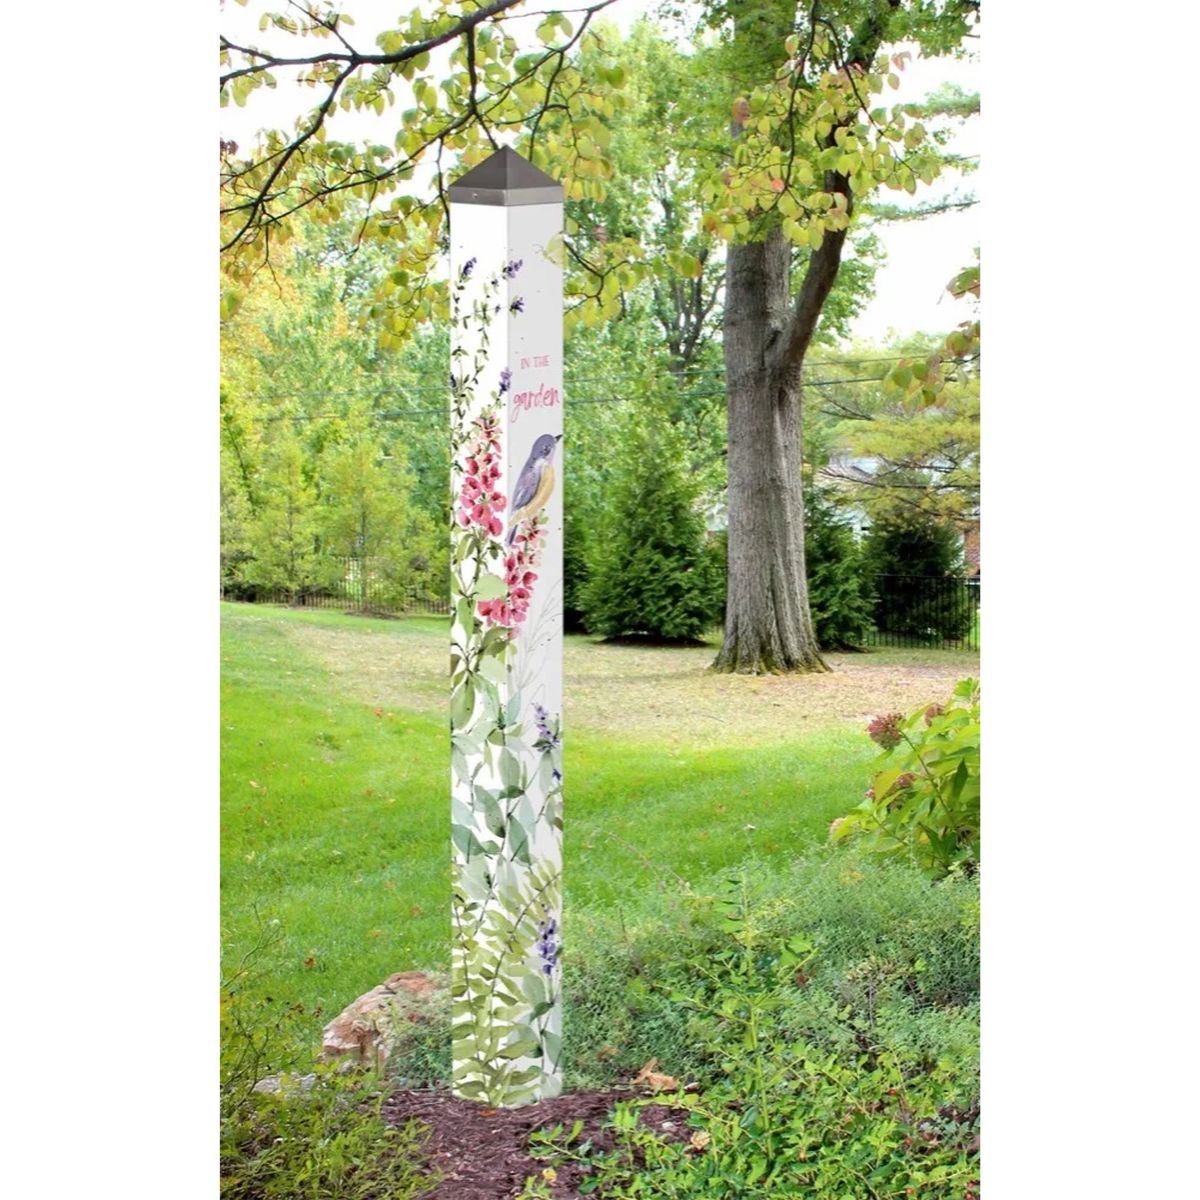 Studio M Cardinals and Berries Art Pole Outdoor Decorative Garden Post,  Made in USA, 60 Inches Tall オーナメント、オブジェ